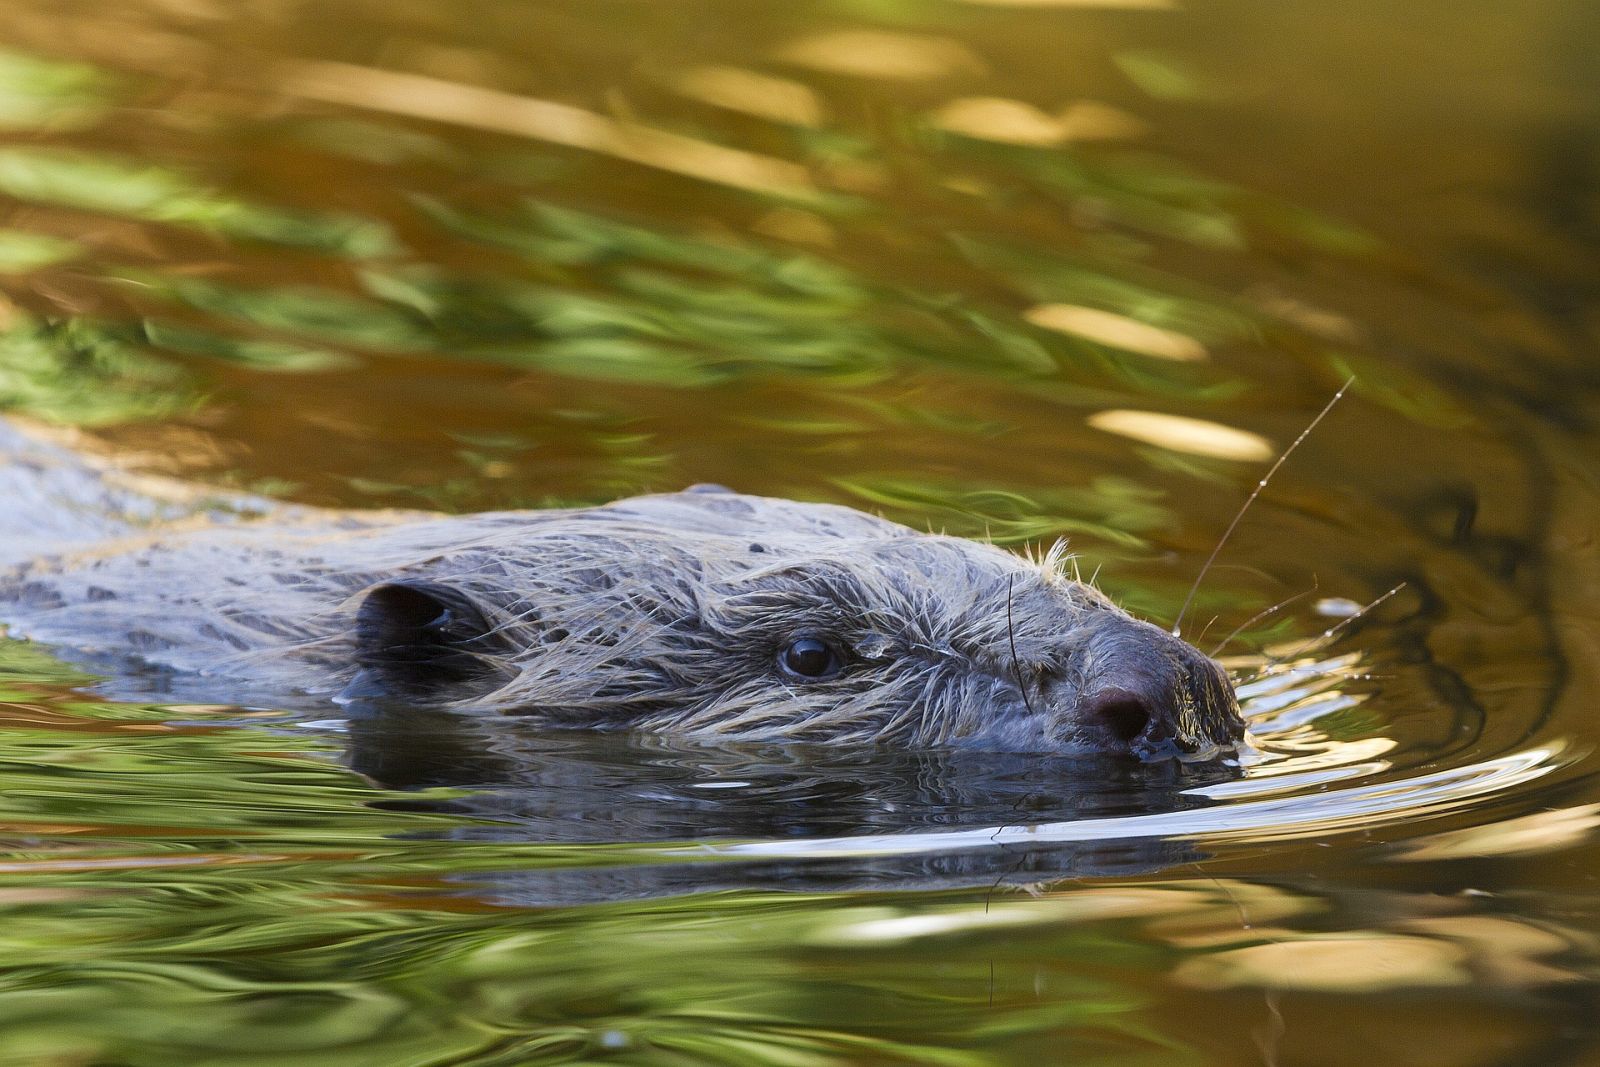 Could we see beavers return to National Parks?